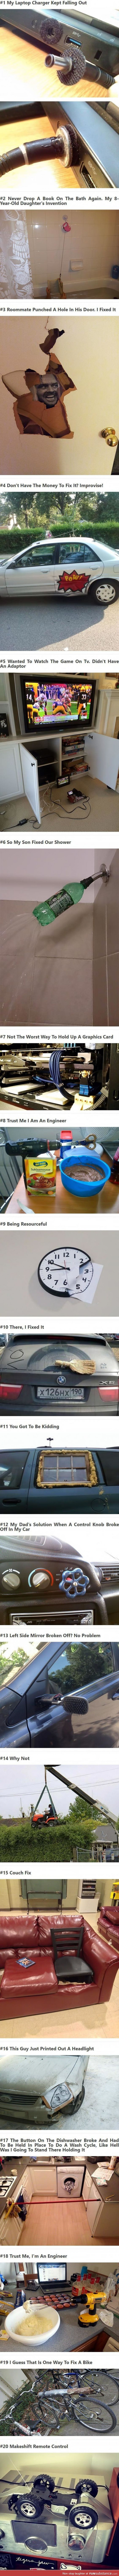 20 Times Engineers Showed Us How to Fix Everyday Things